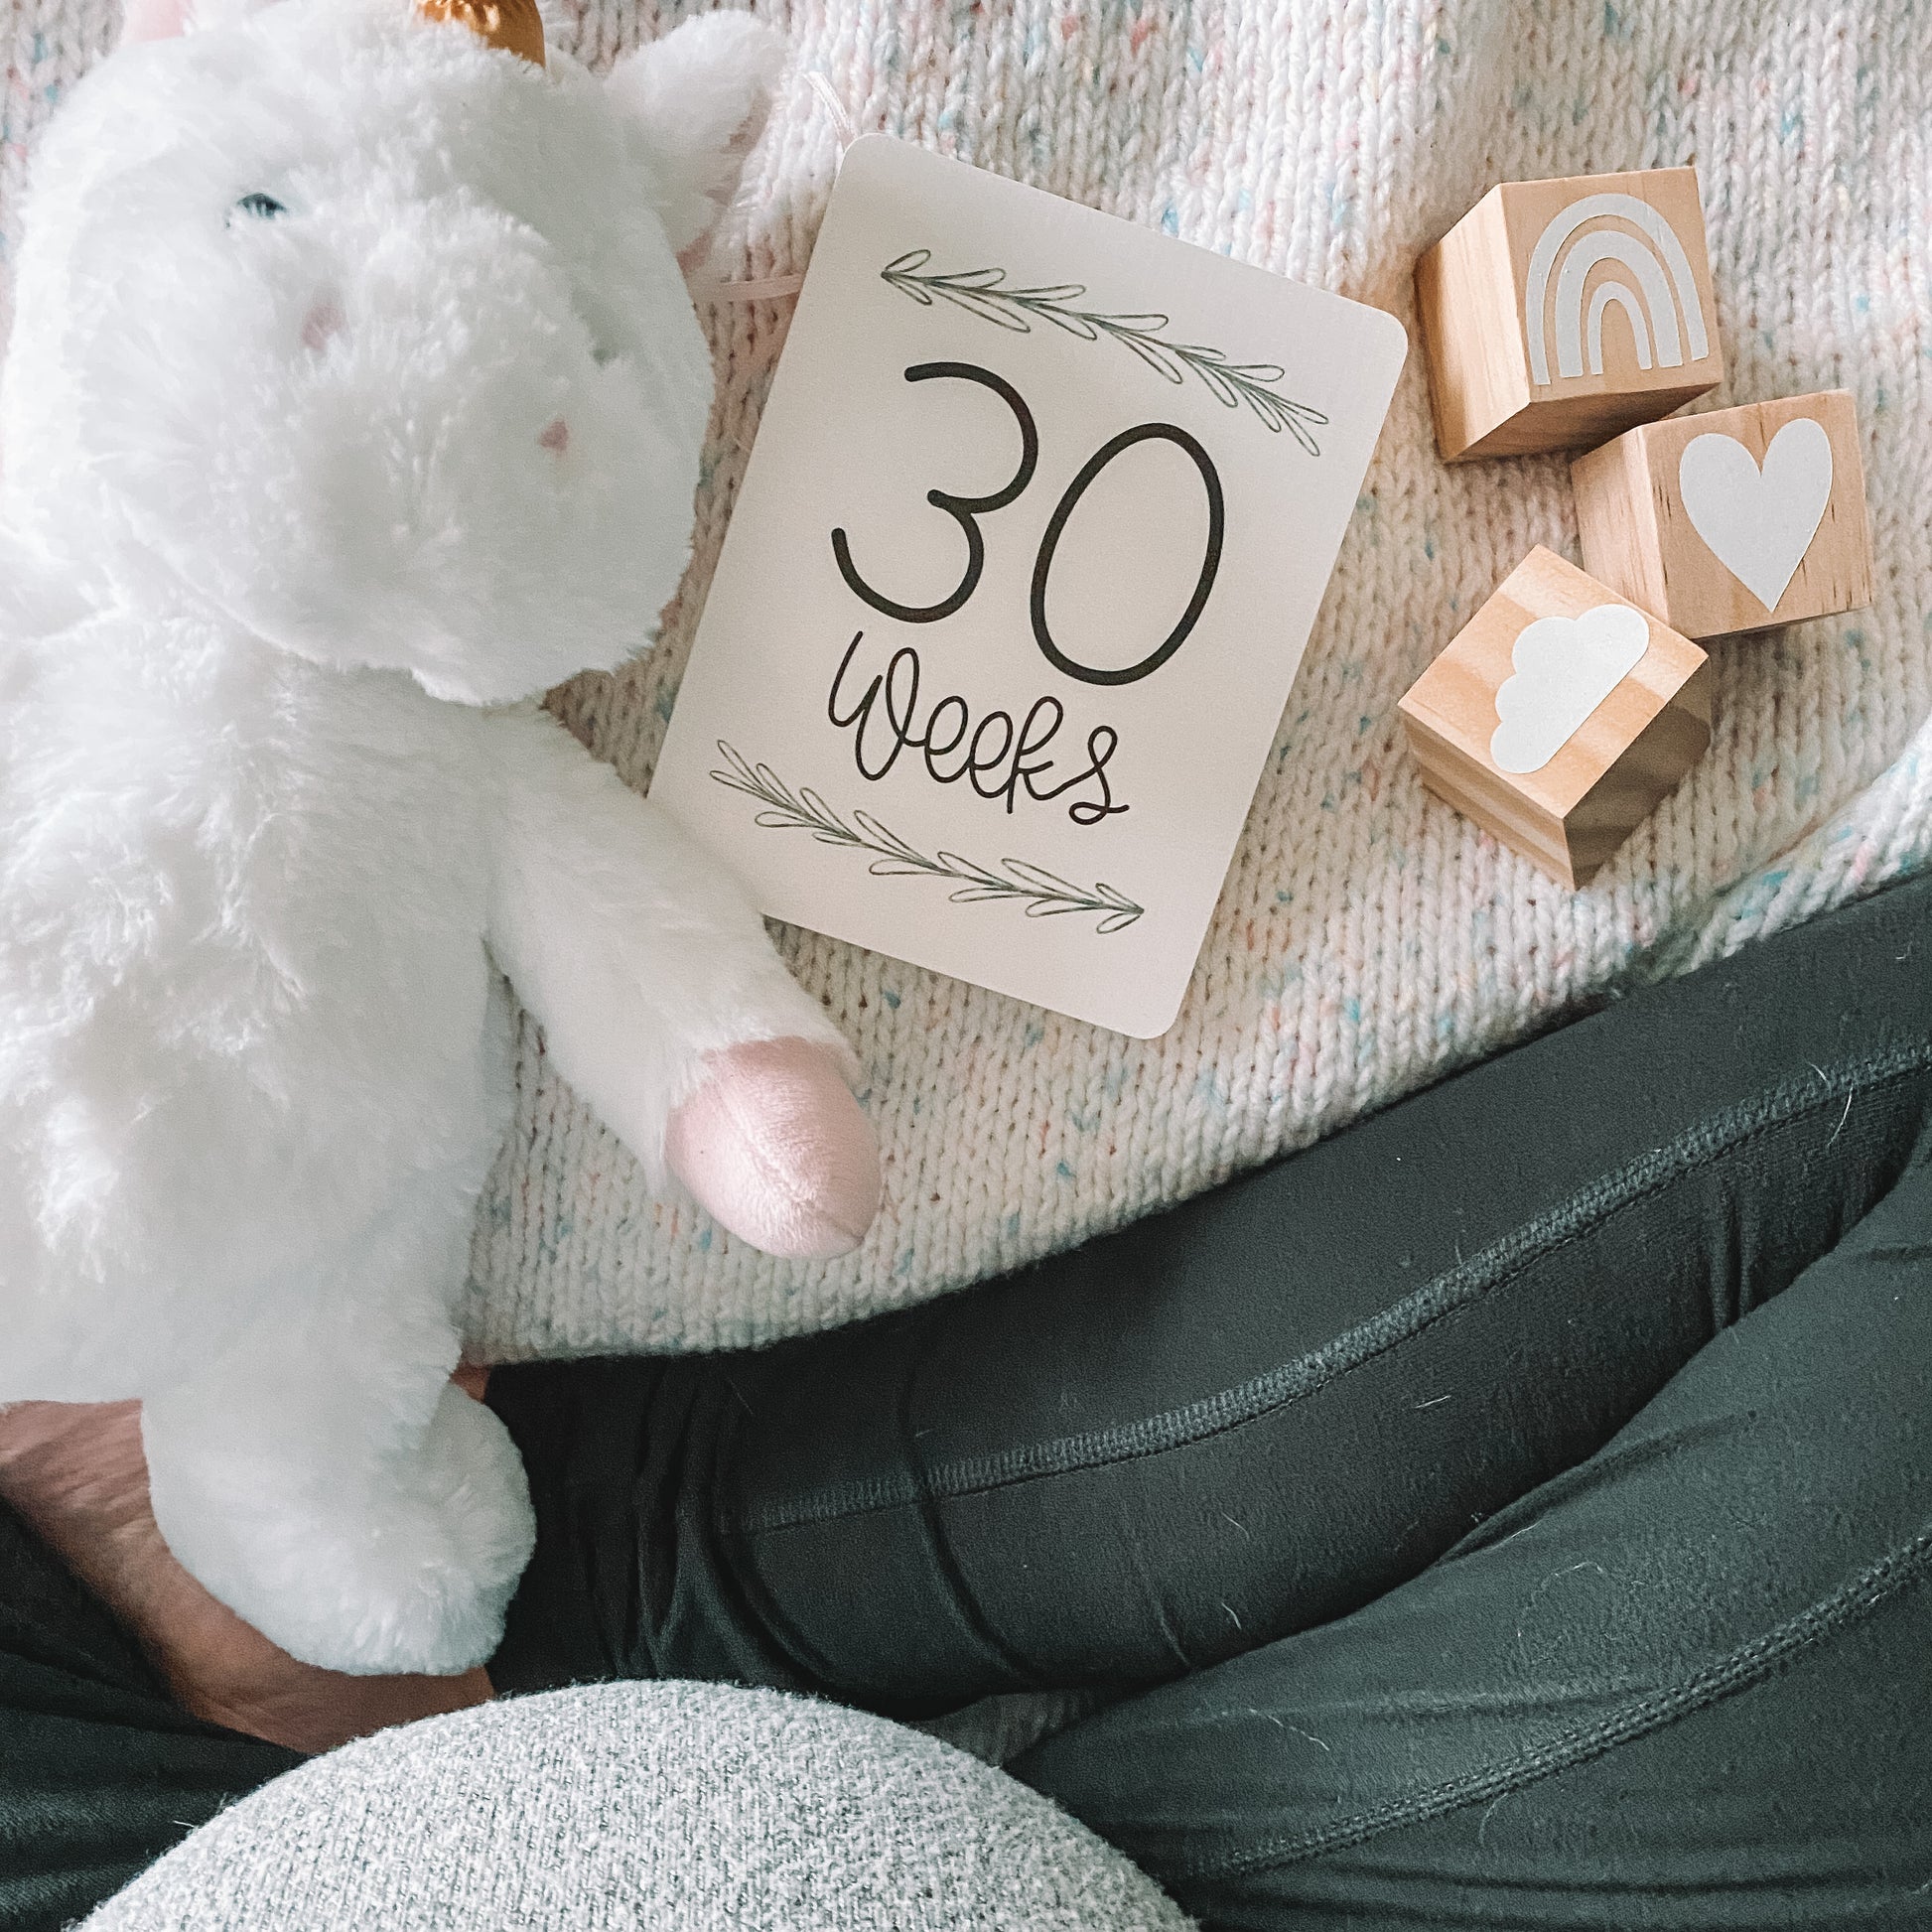 View of pregnant belly with a 30 week milestone card, unicorn stuffed animal, and blocks laid on a blanket in front.